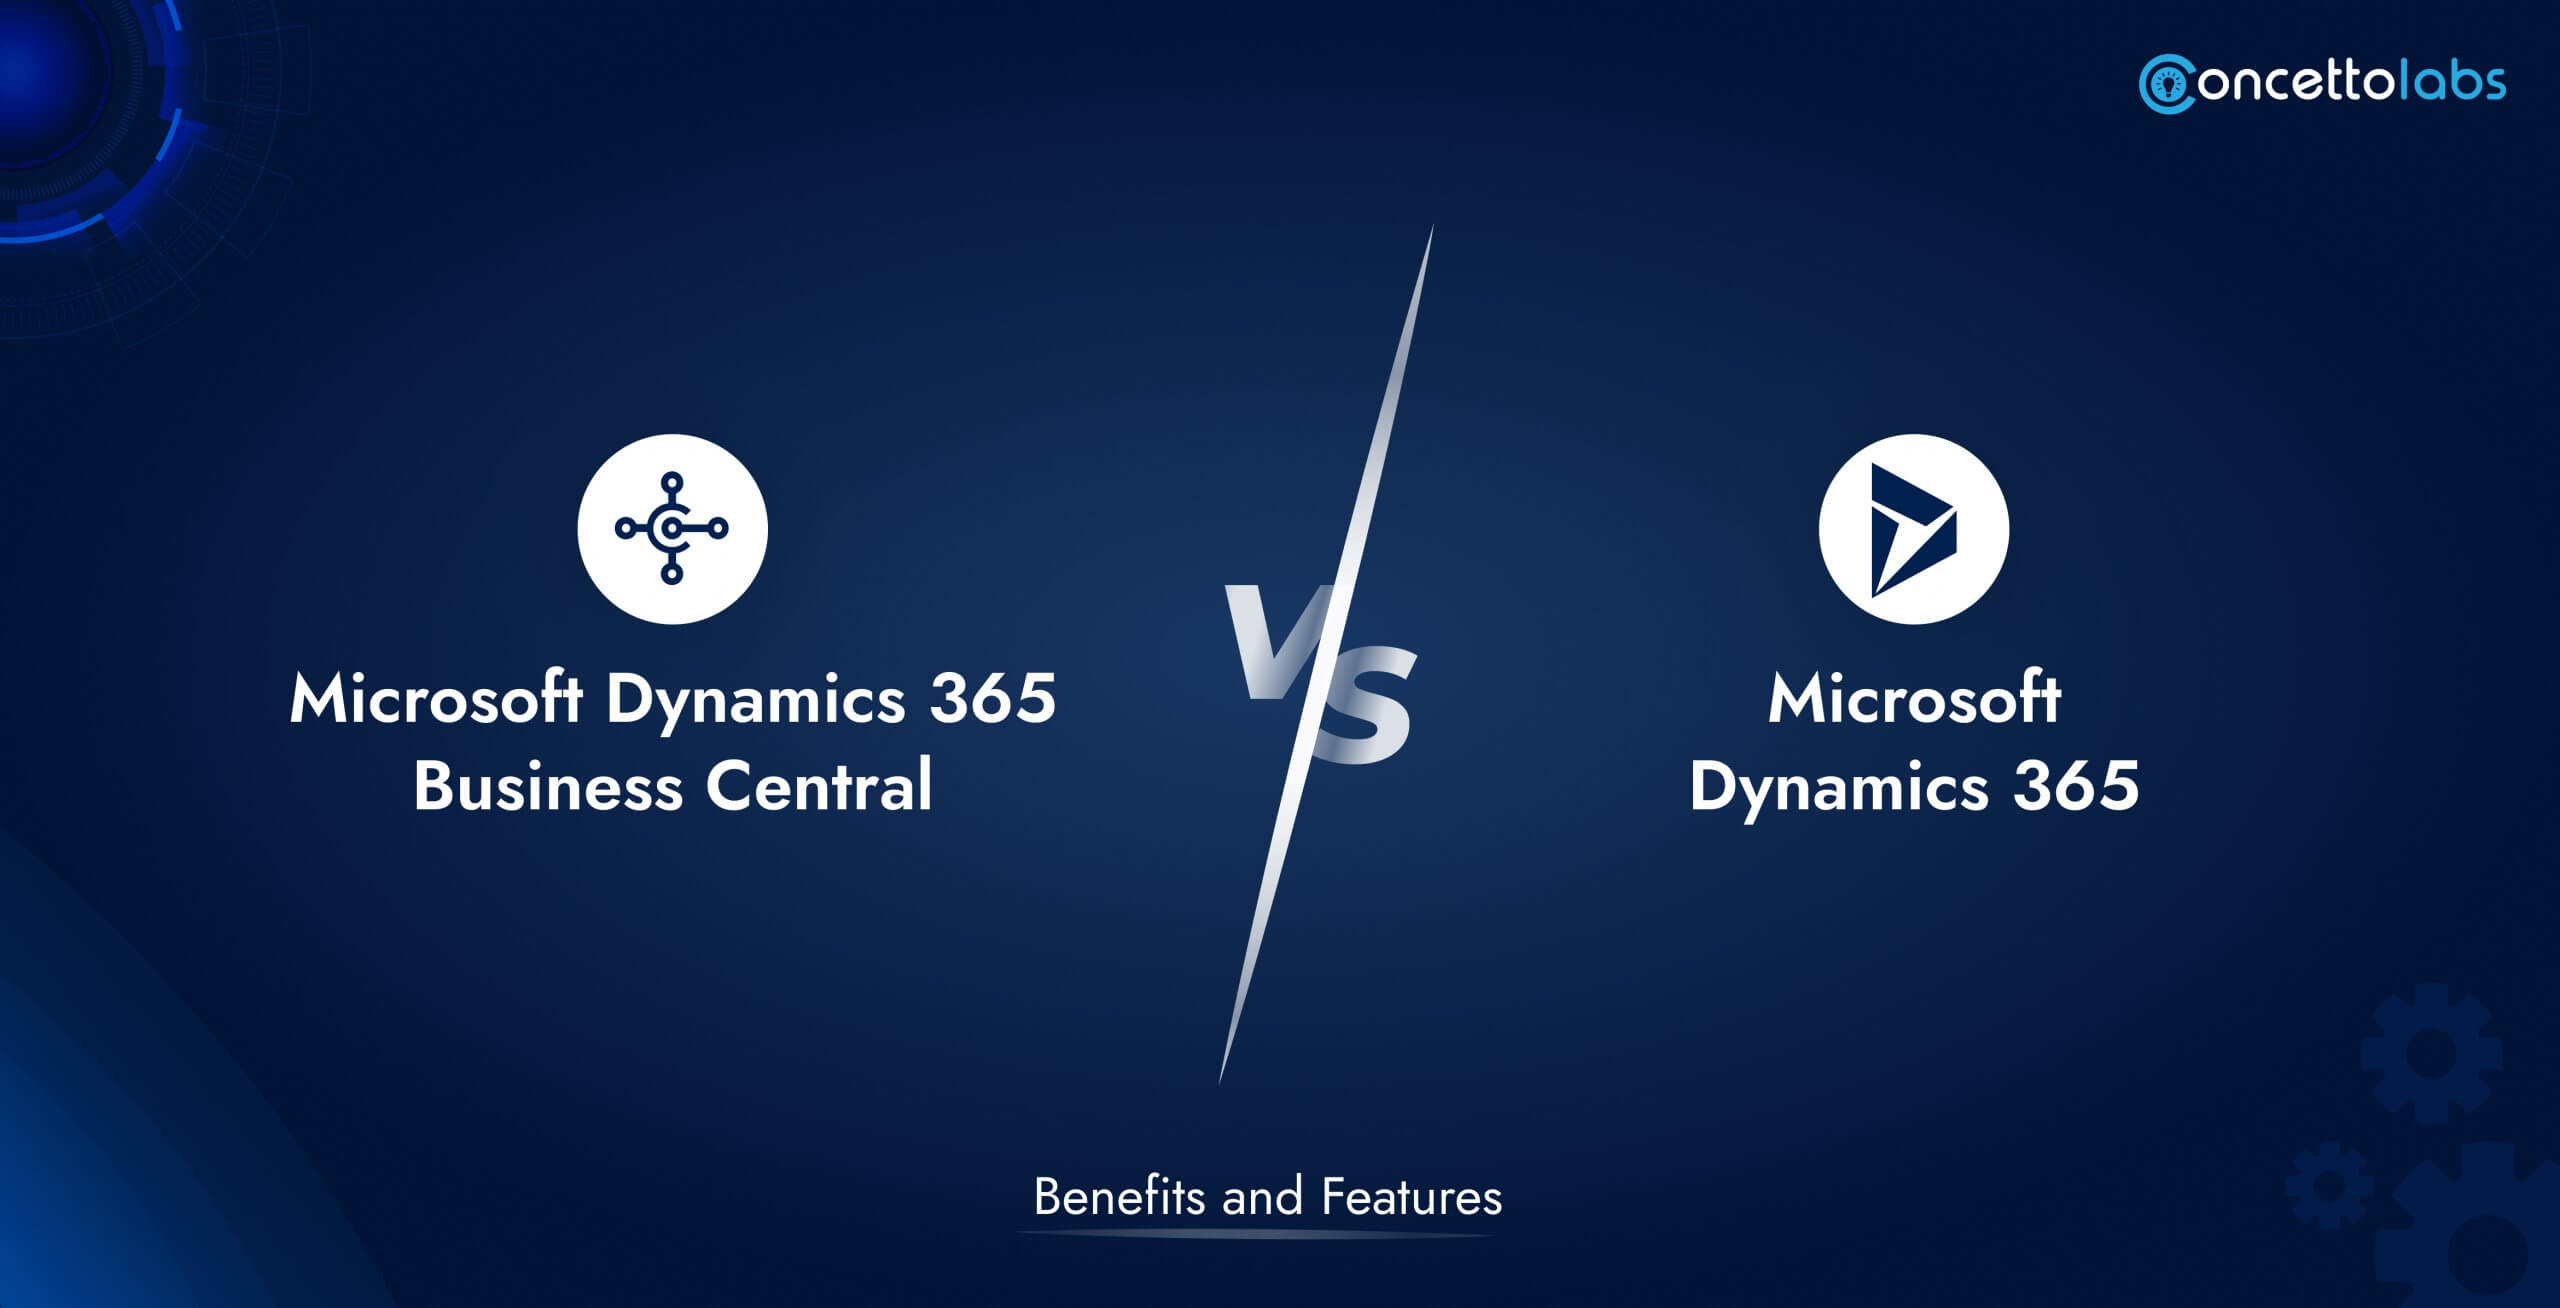 What is Microsoft Dynamics 365 Business Central vs Dynamics 365 – Benefits and Features?